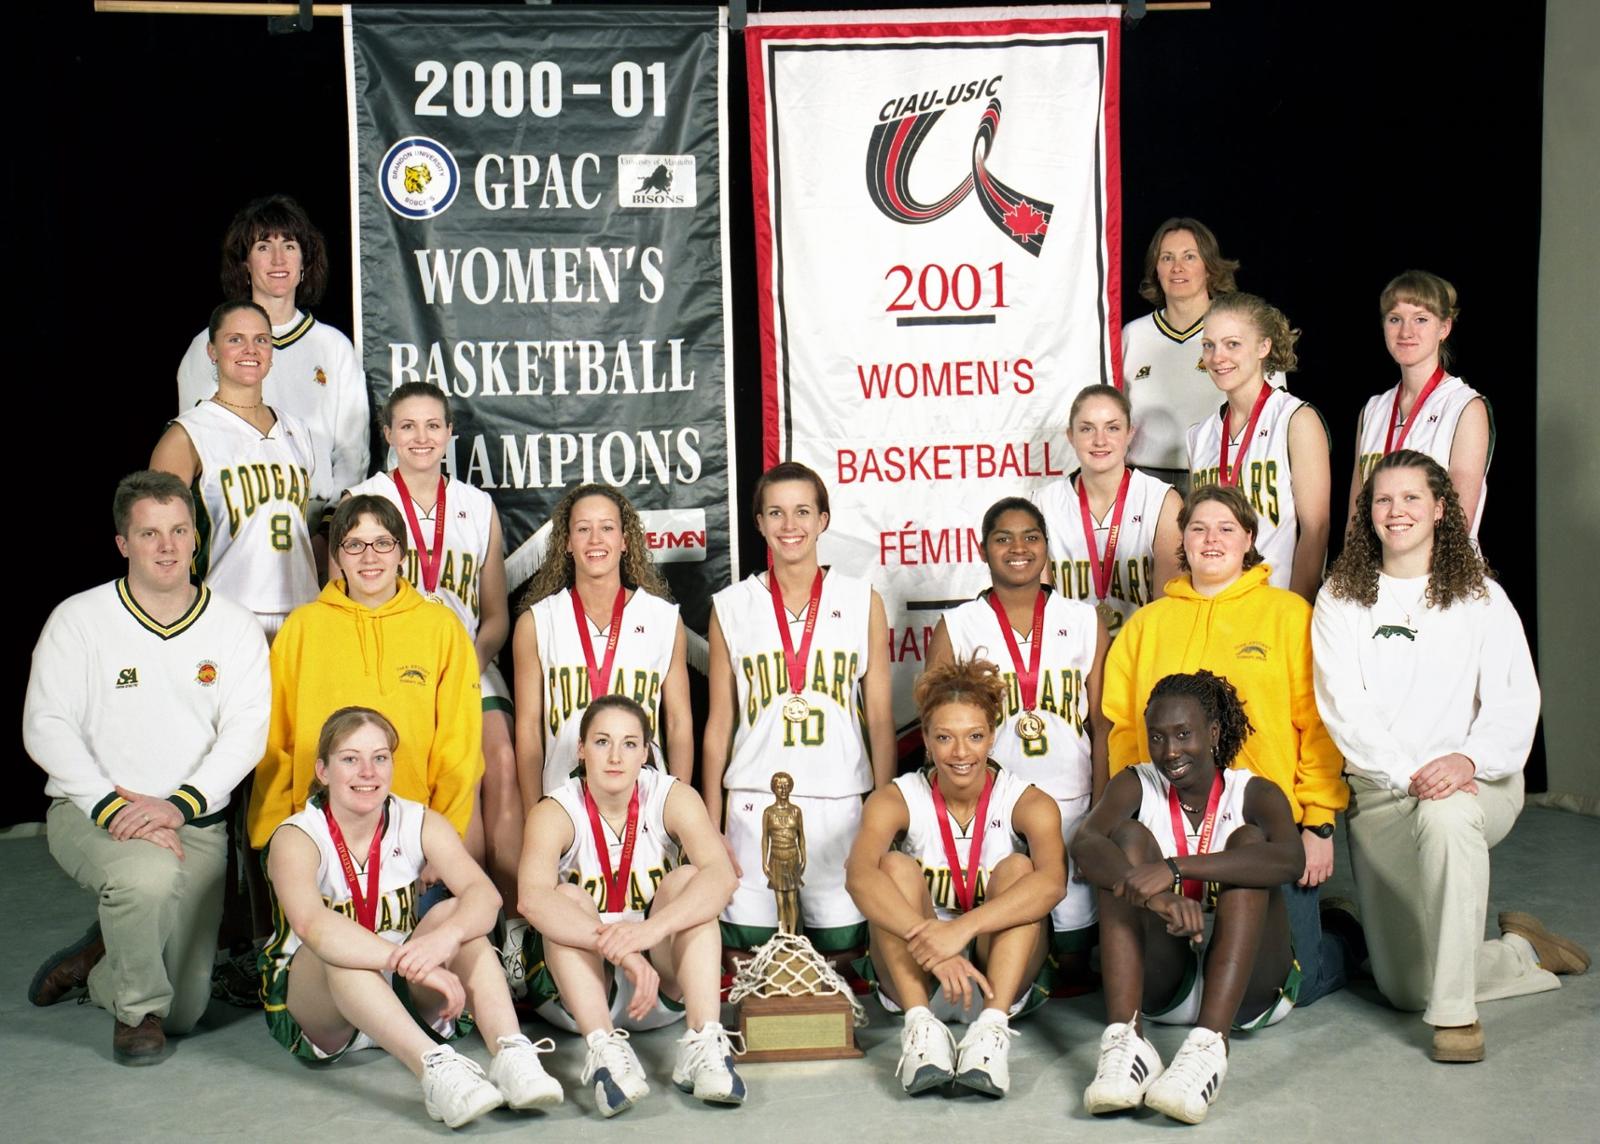 Women basketball team poses for photo in front of 2000-01 banners highlighting winning season.